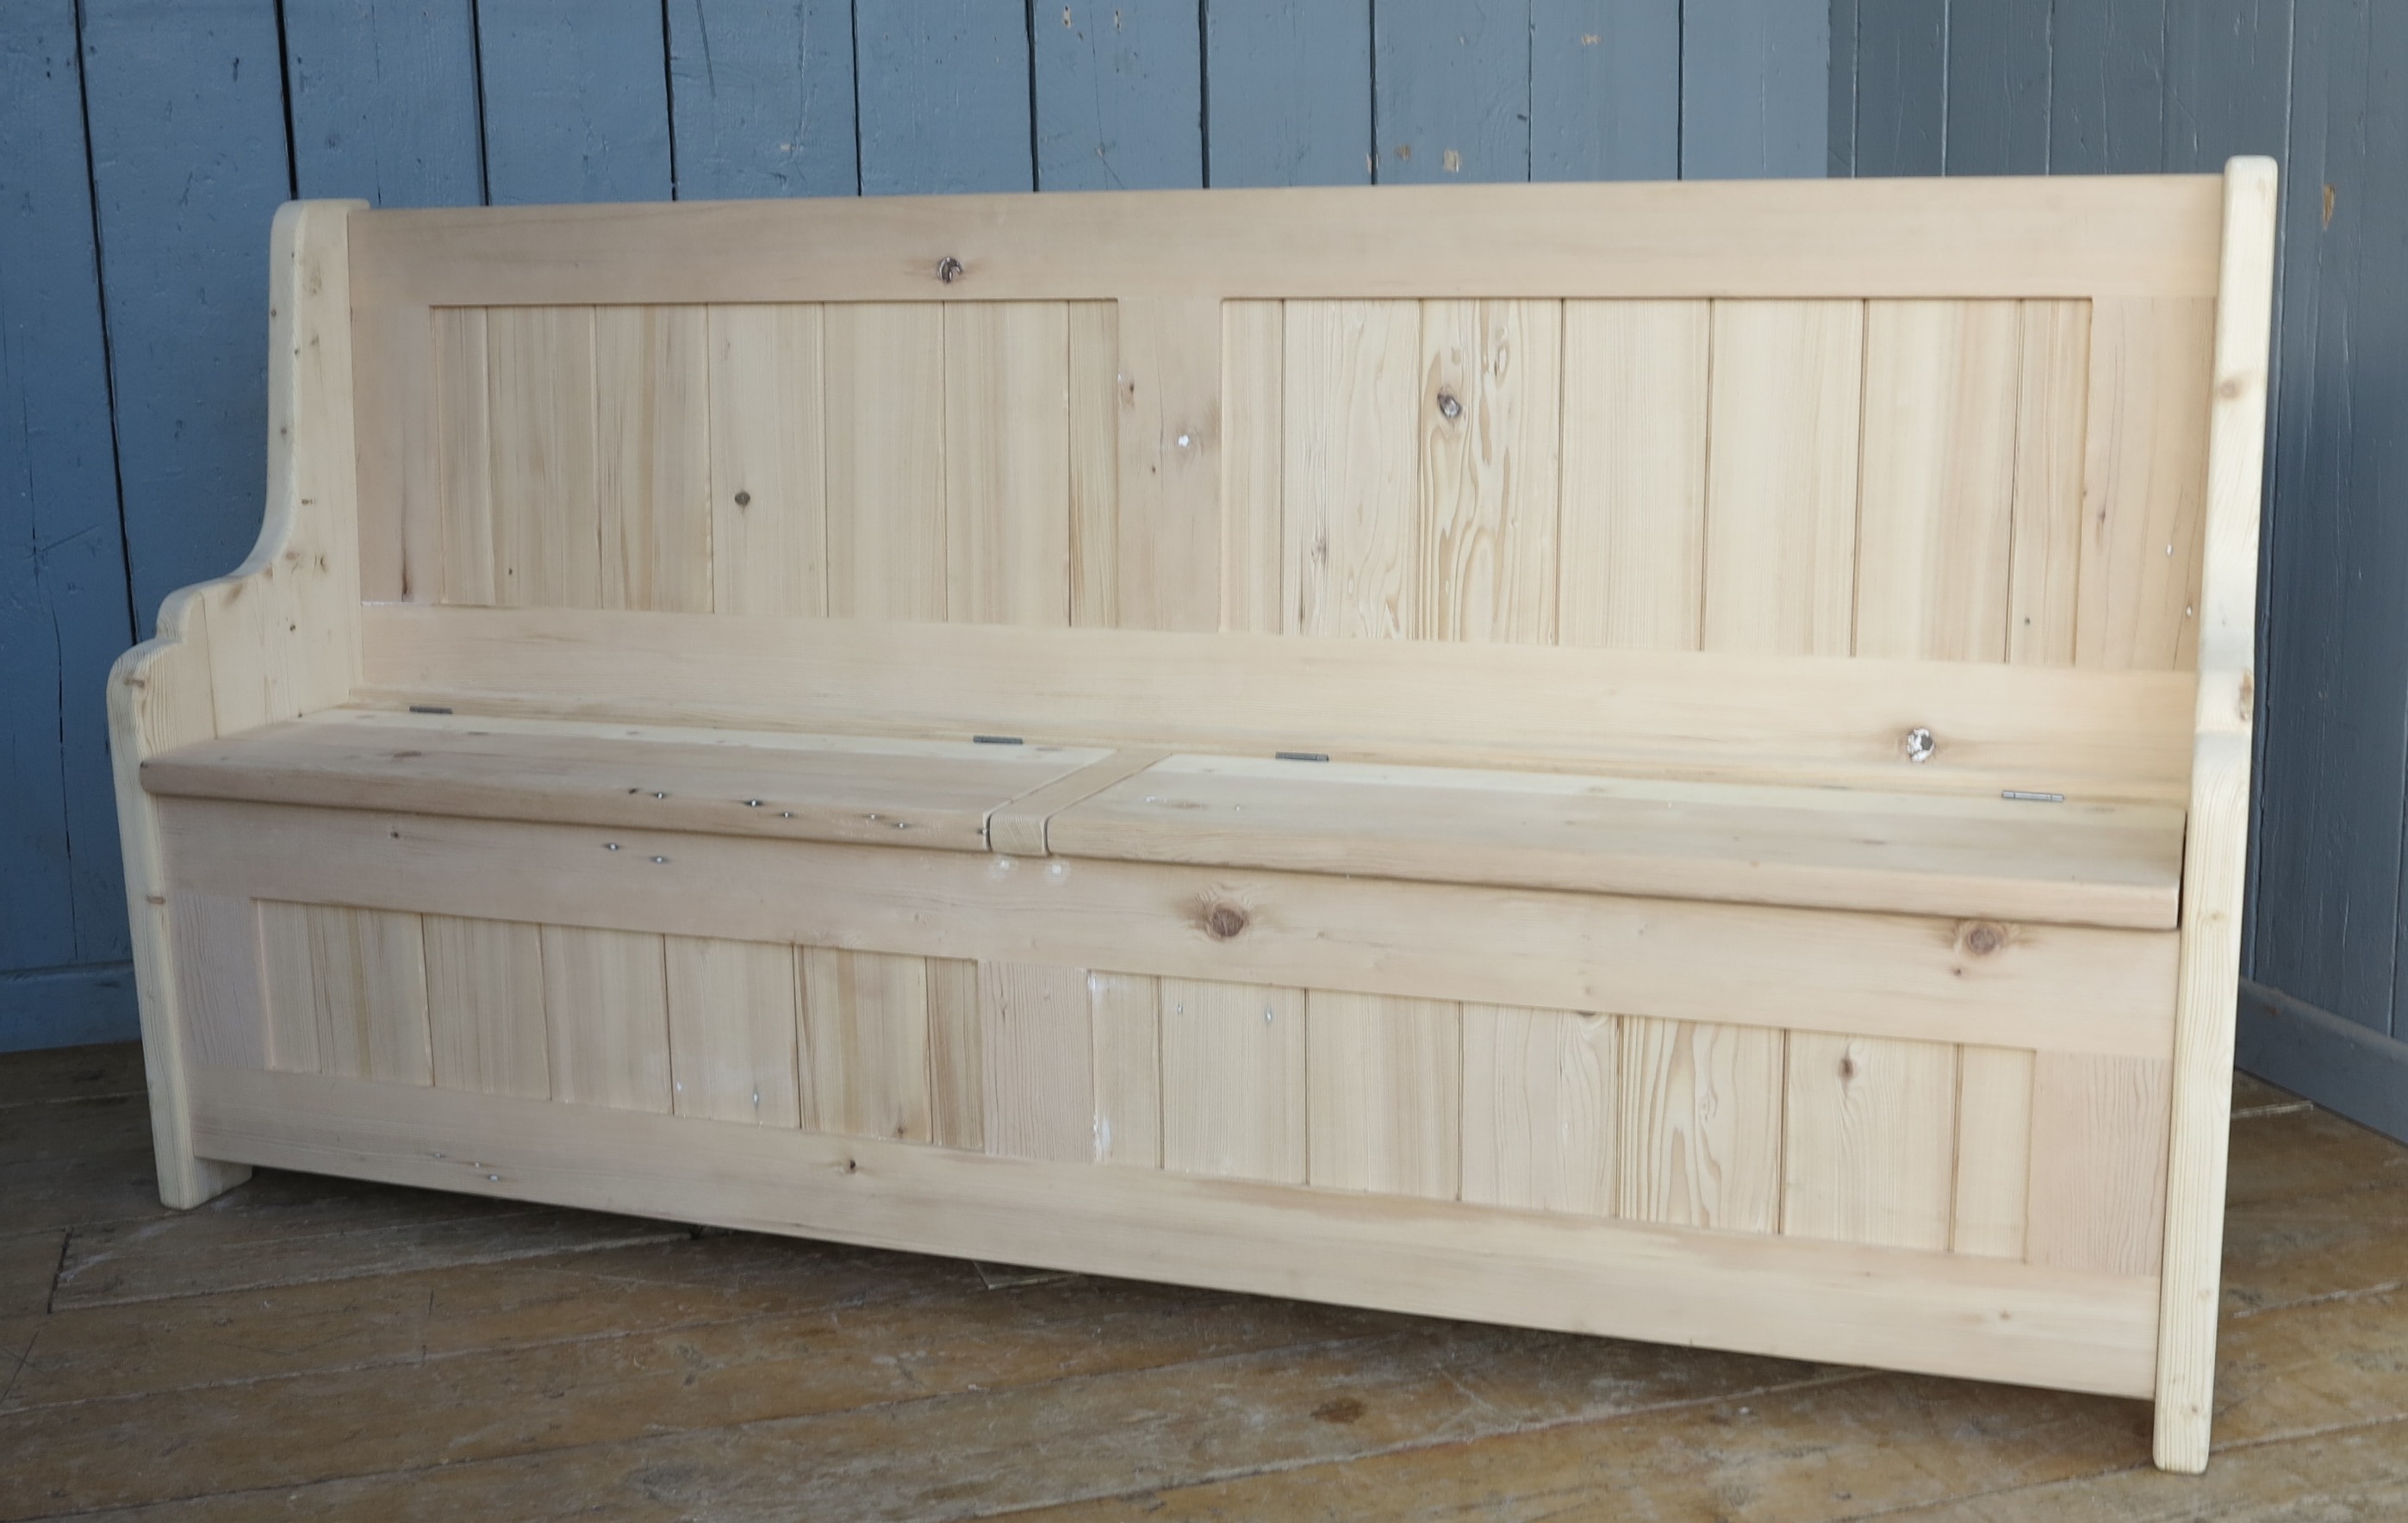 bespoke reclaimed pine settle with lift up seat made at UKAA by hand, can be waxed or painted in farrow and ball